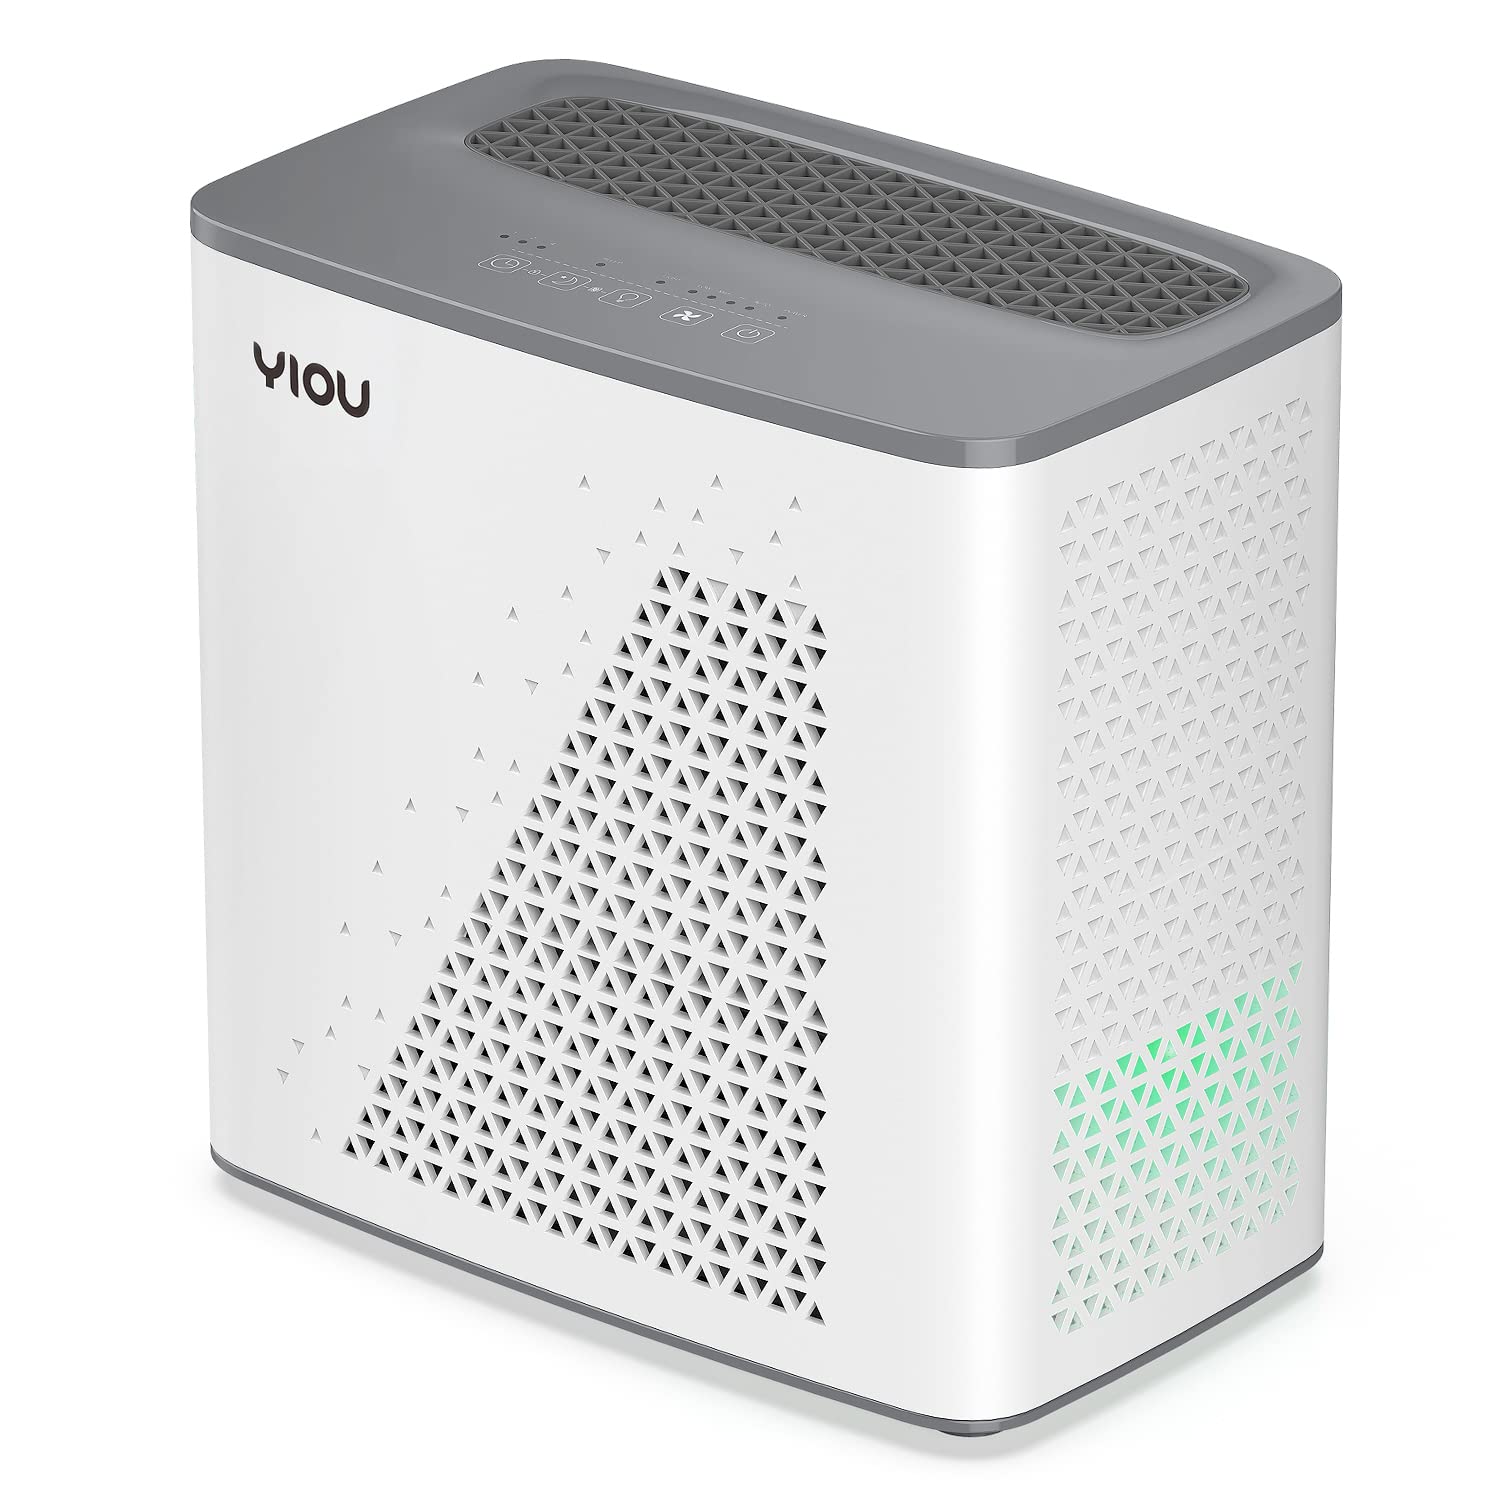 YIOU Air Purifier for Home Large Room up to 547 ft H13 True HEPA Air Filter 20dB Air Cleaner Odor Eliminator for Allergies